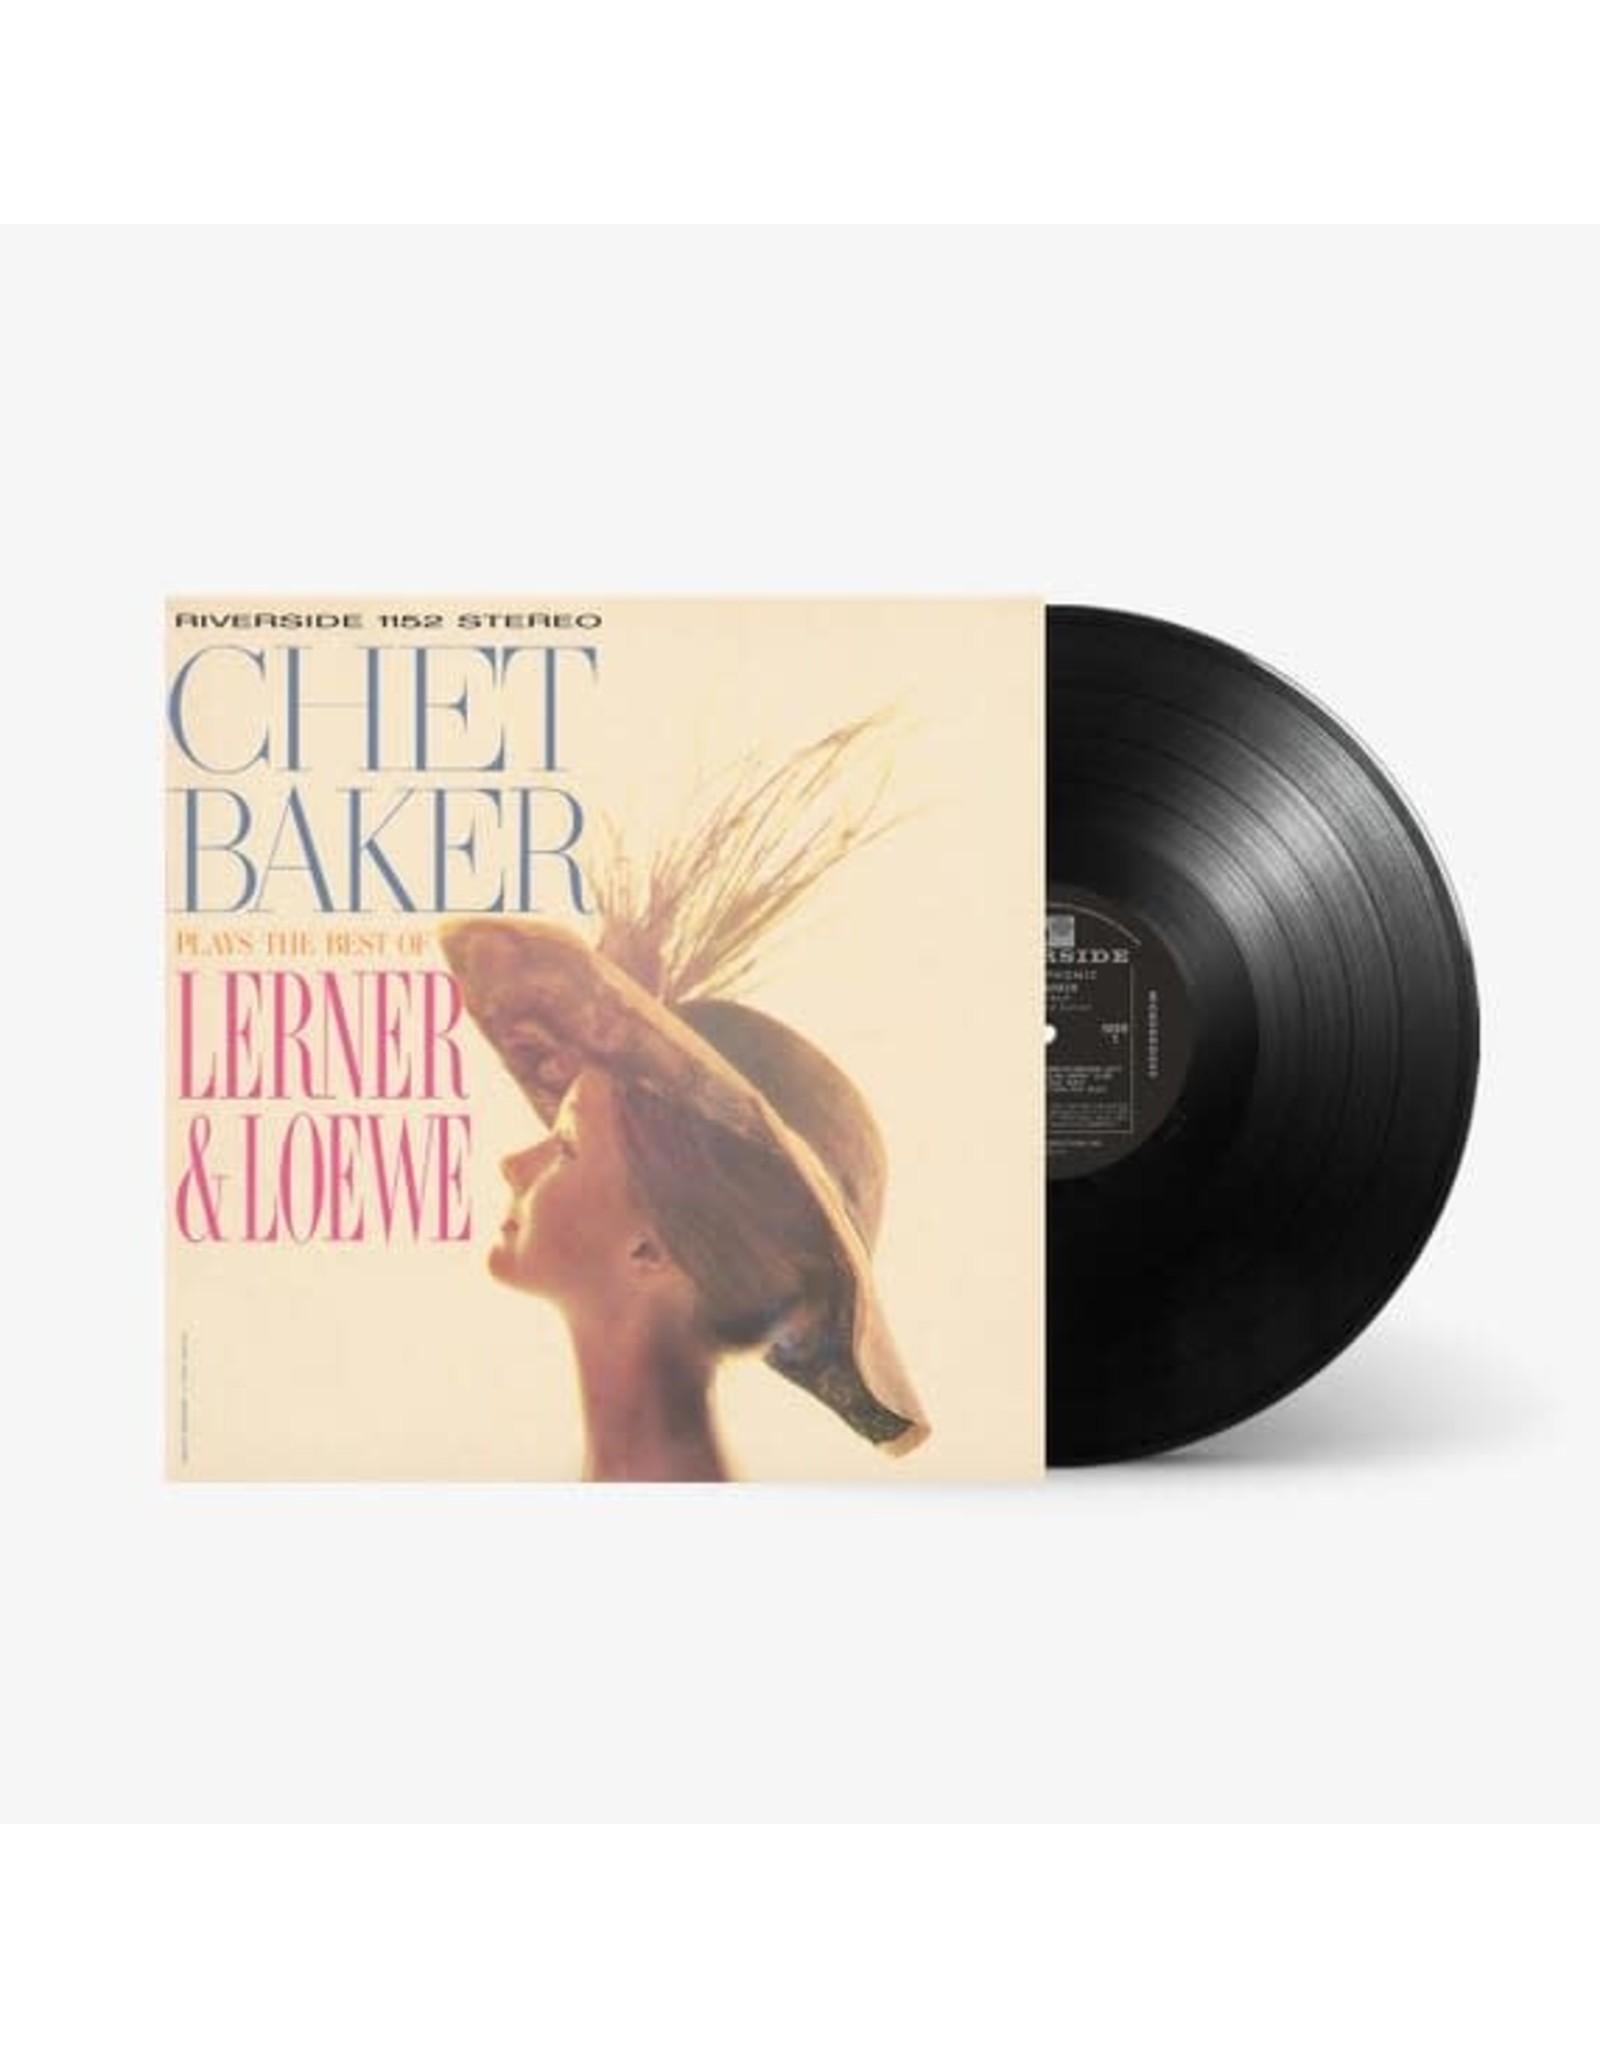 Craft Baker, Chet: Plays the Best Of Lerner And Loew LP